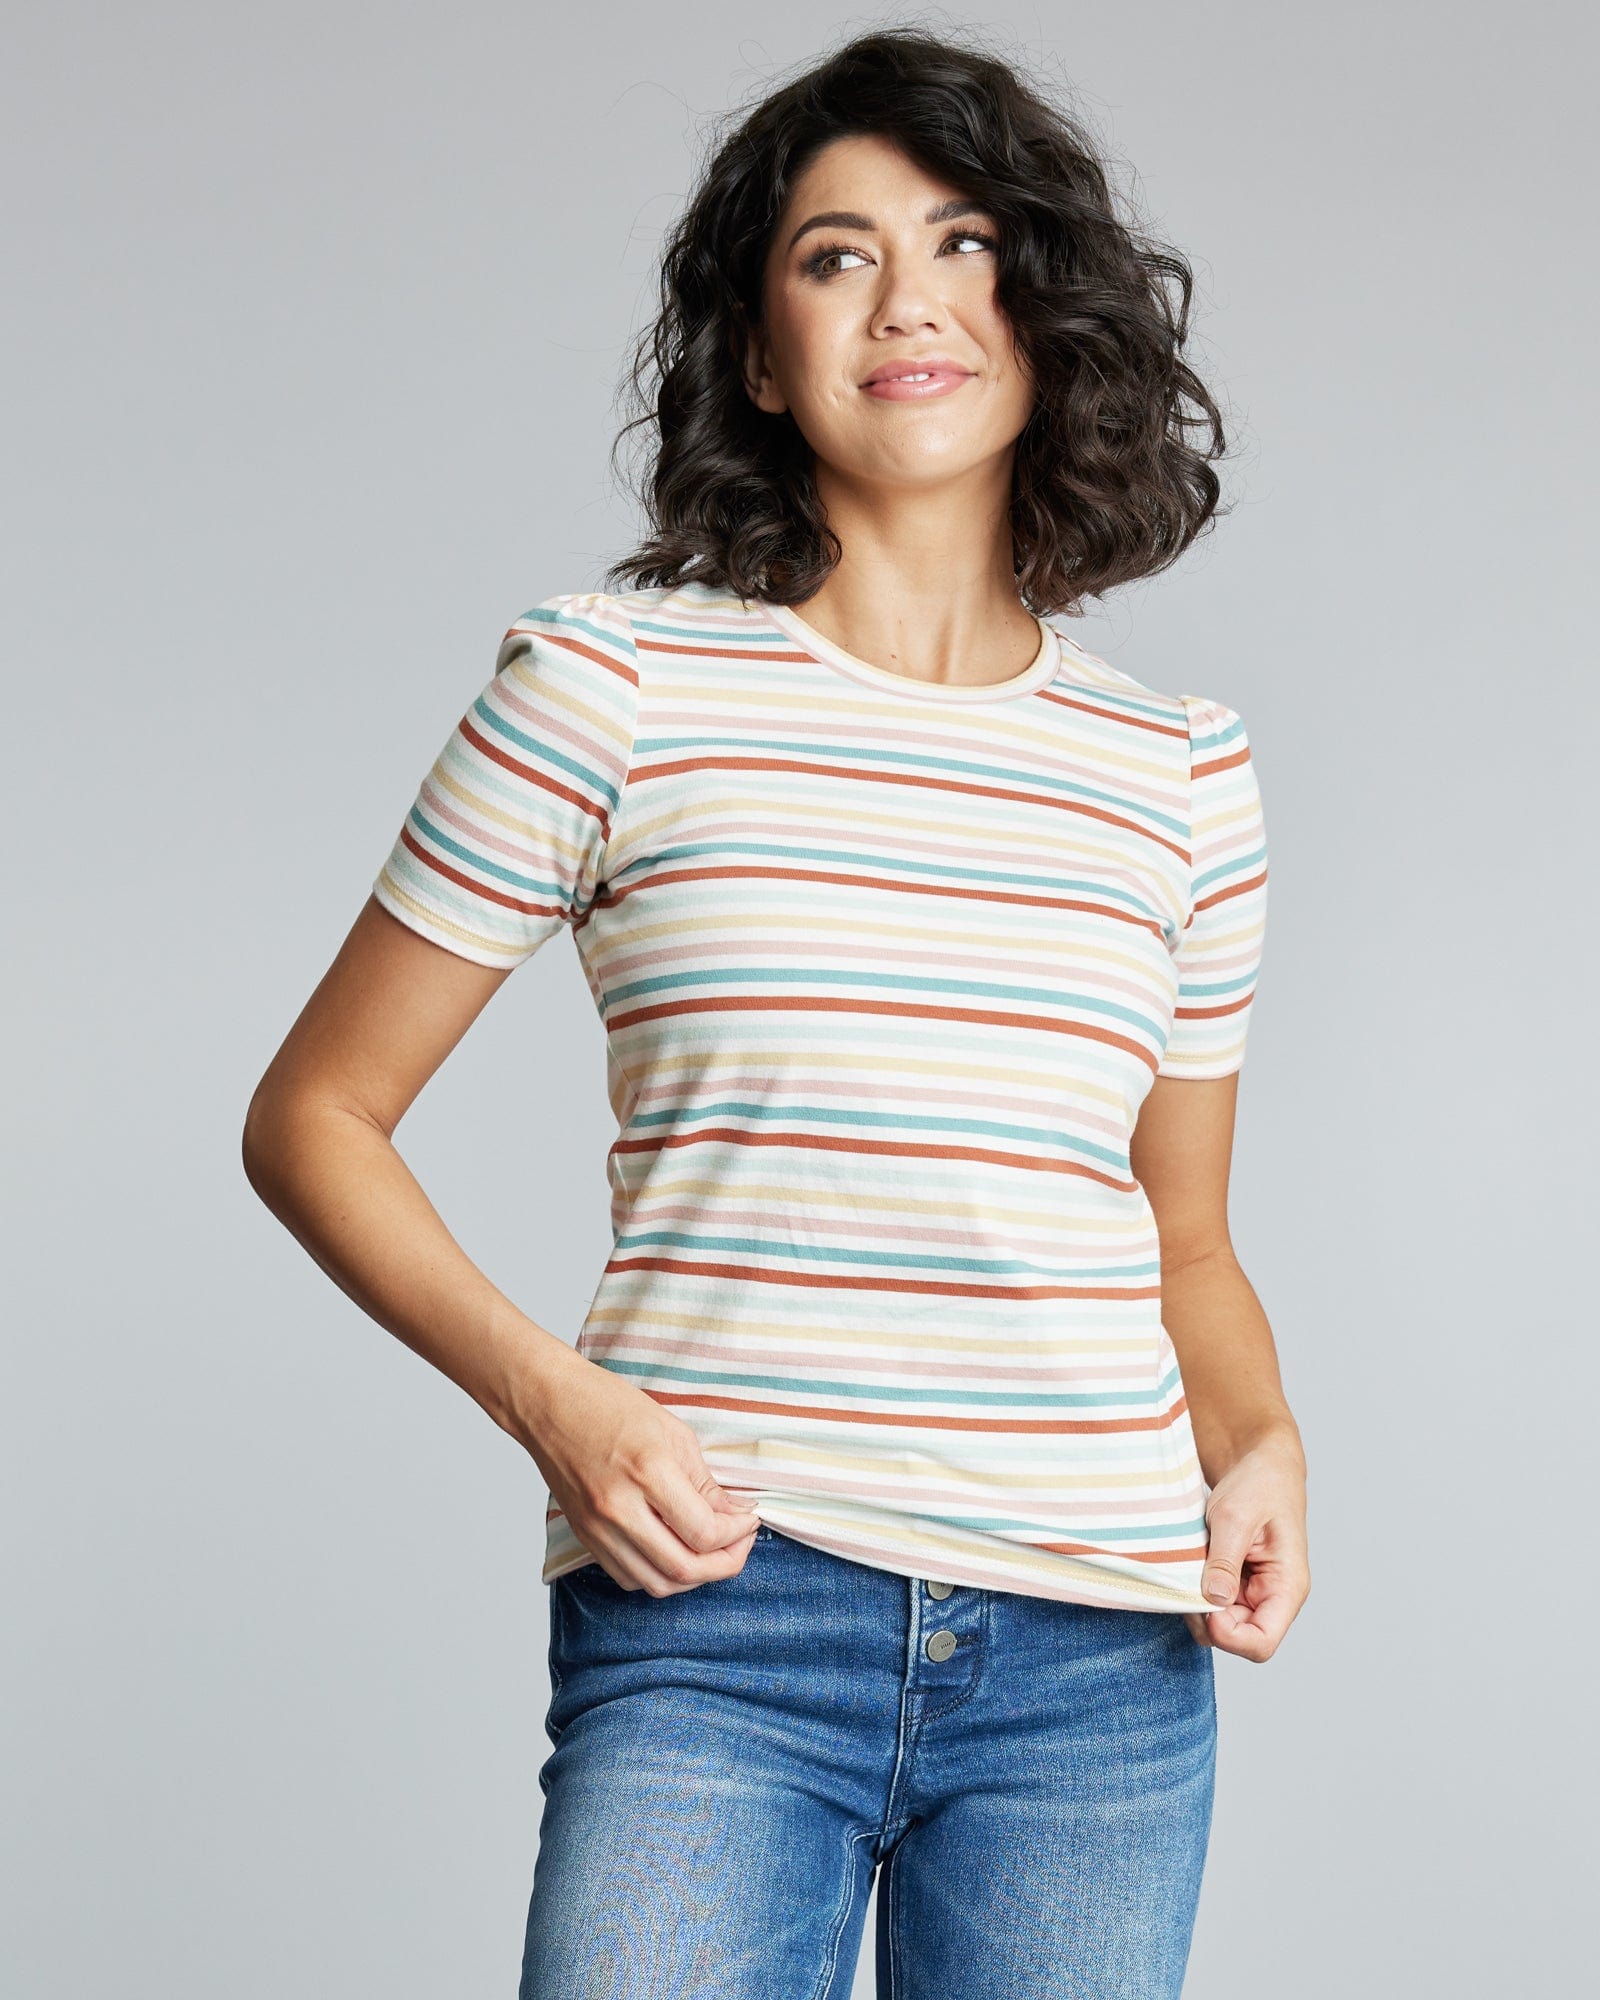 Woman in a short sleeve striped t-shirt